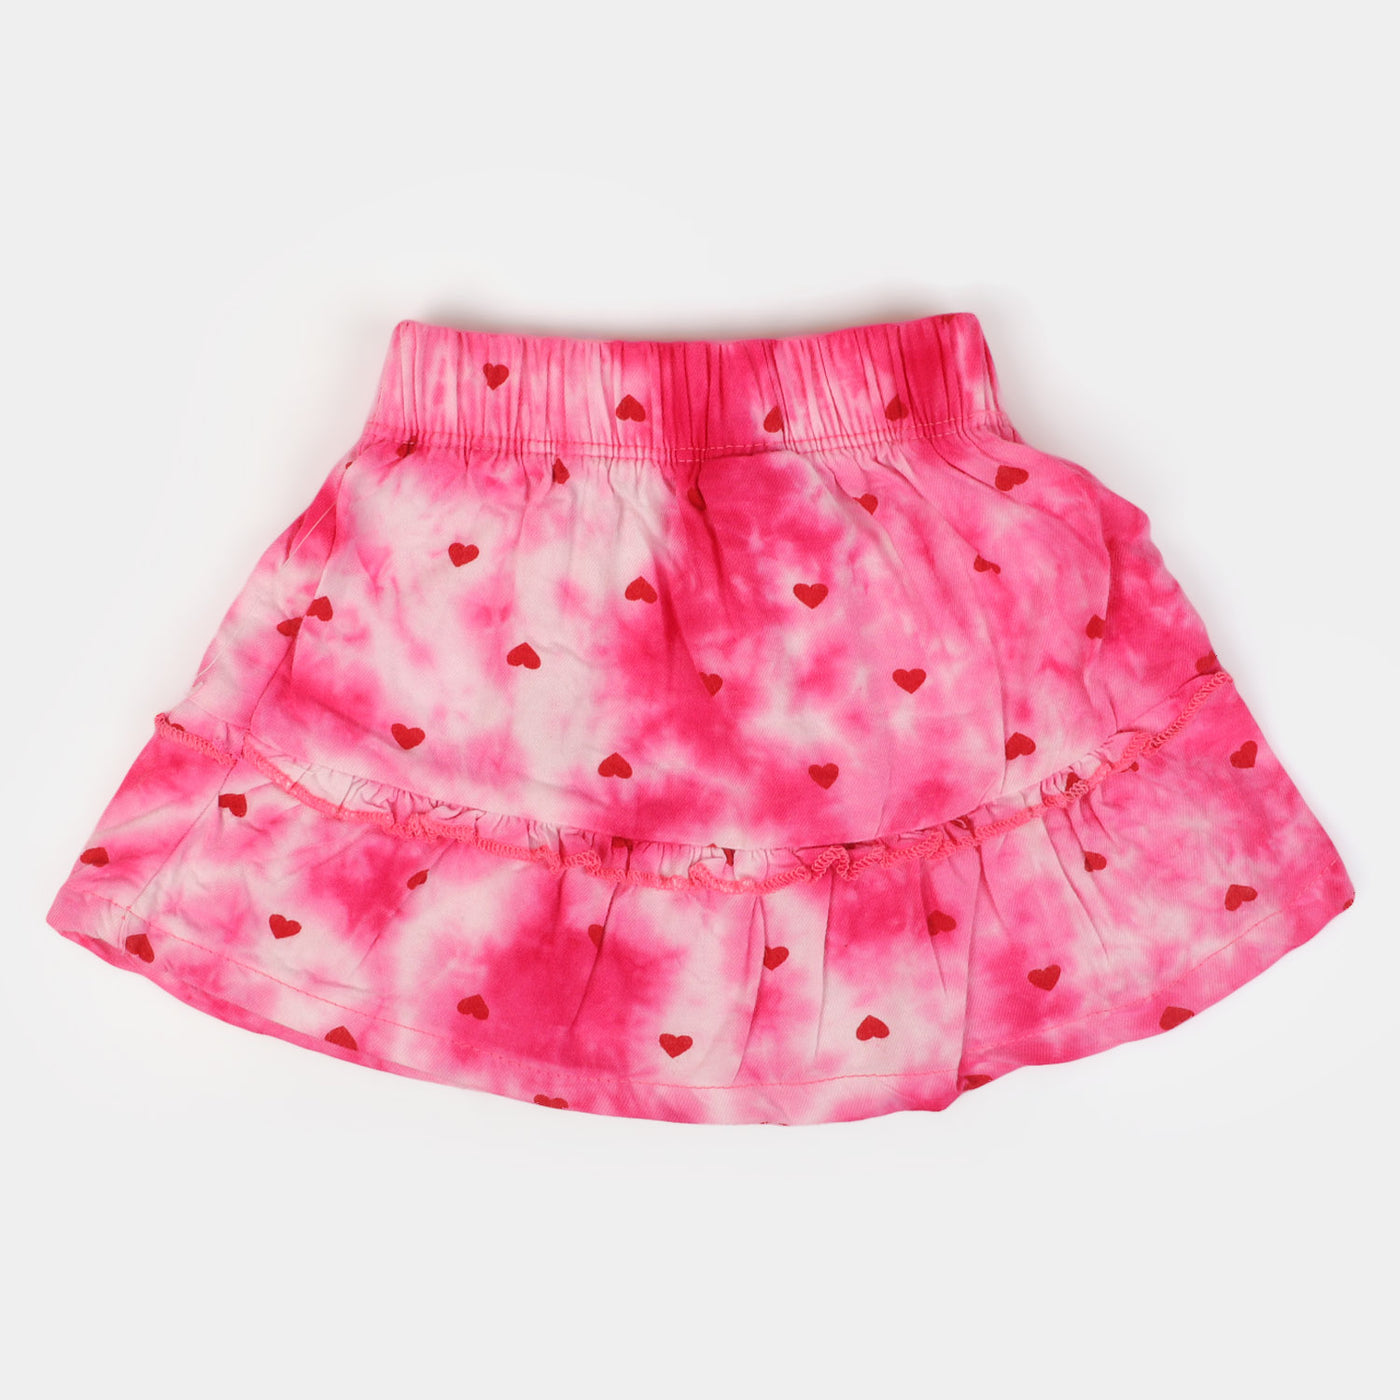 Infant Girls Cotton Casual Skirt Tie Dye Hearts - Hot Pink